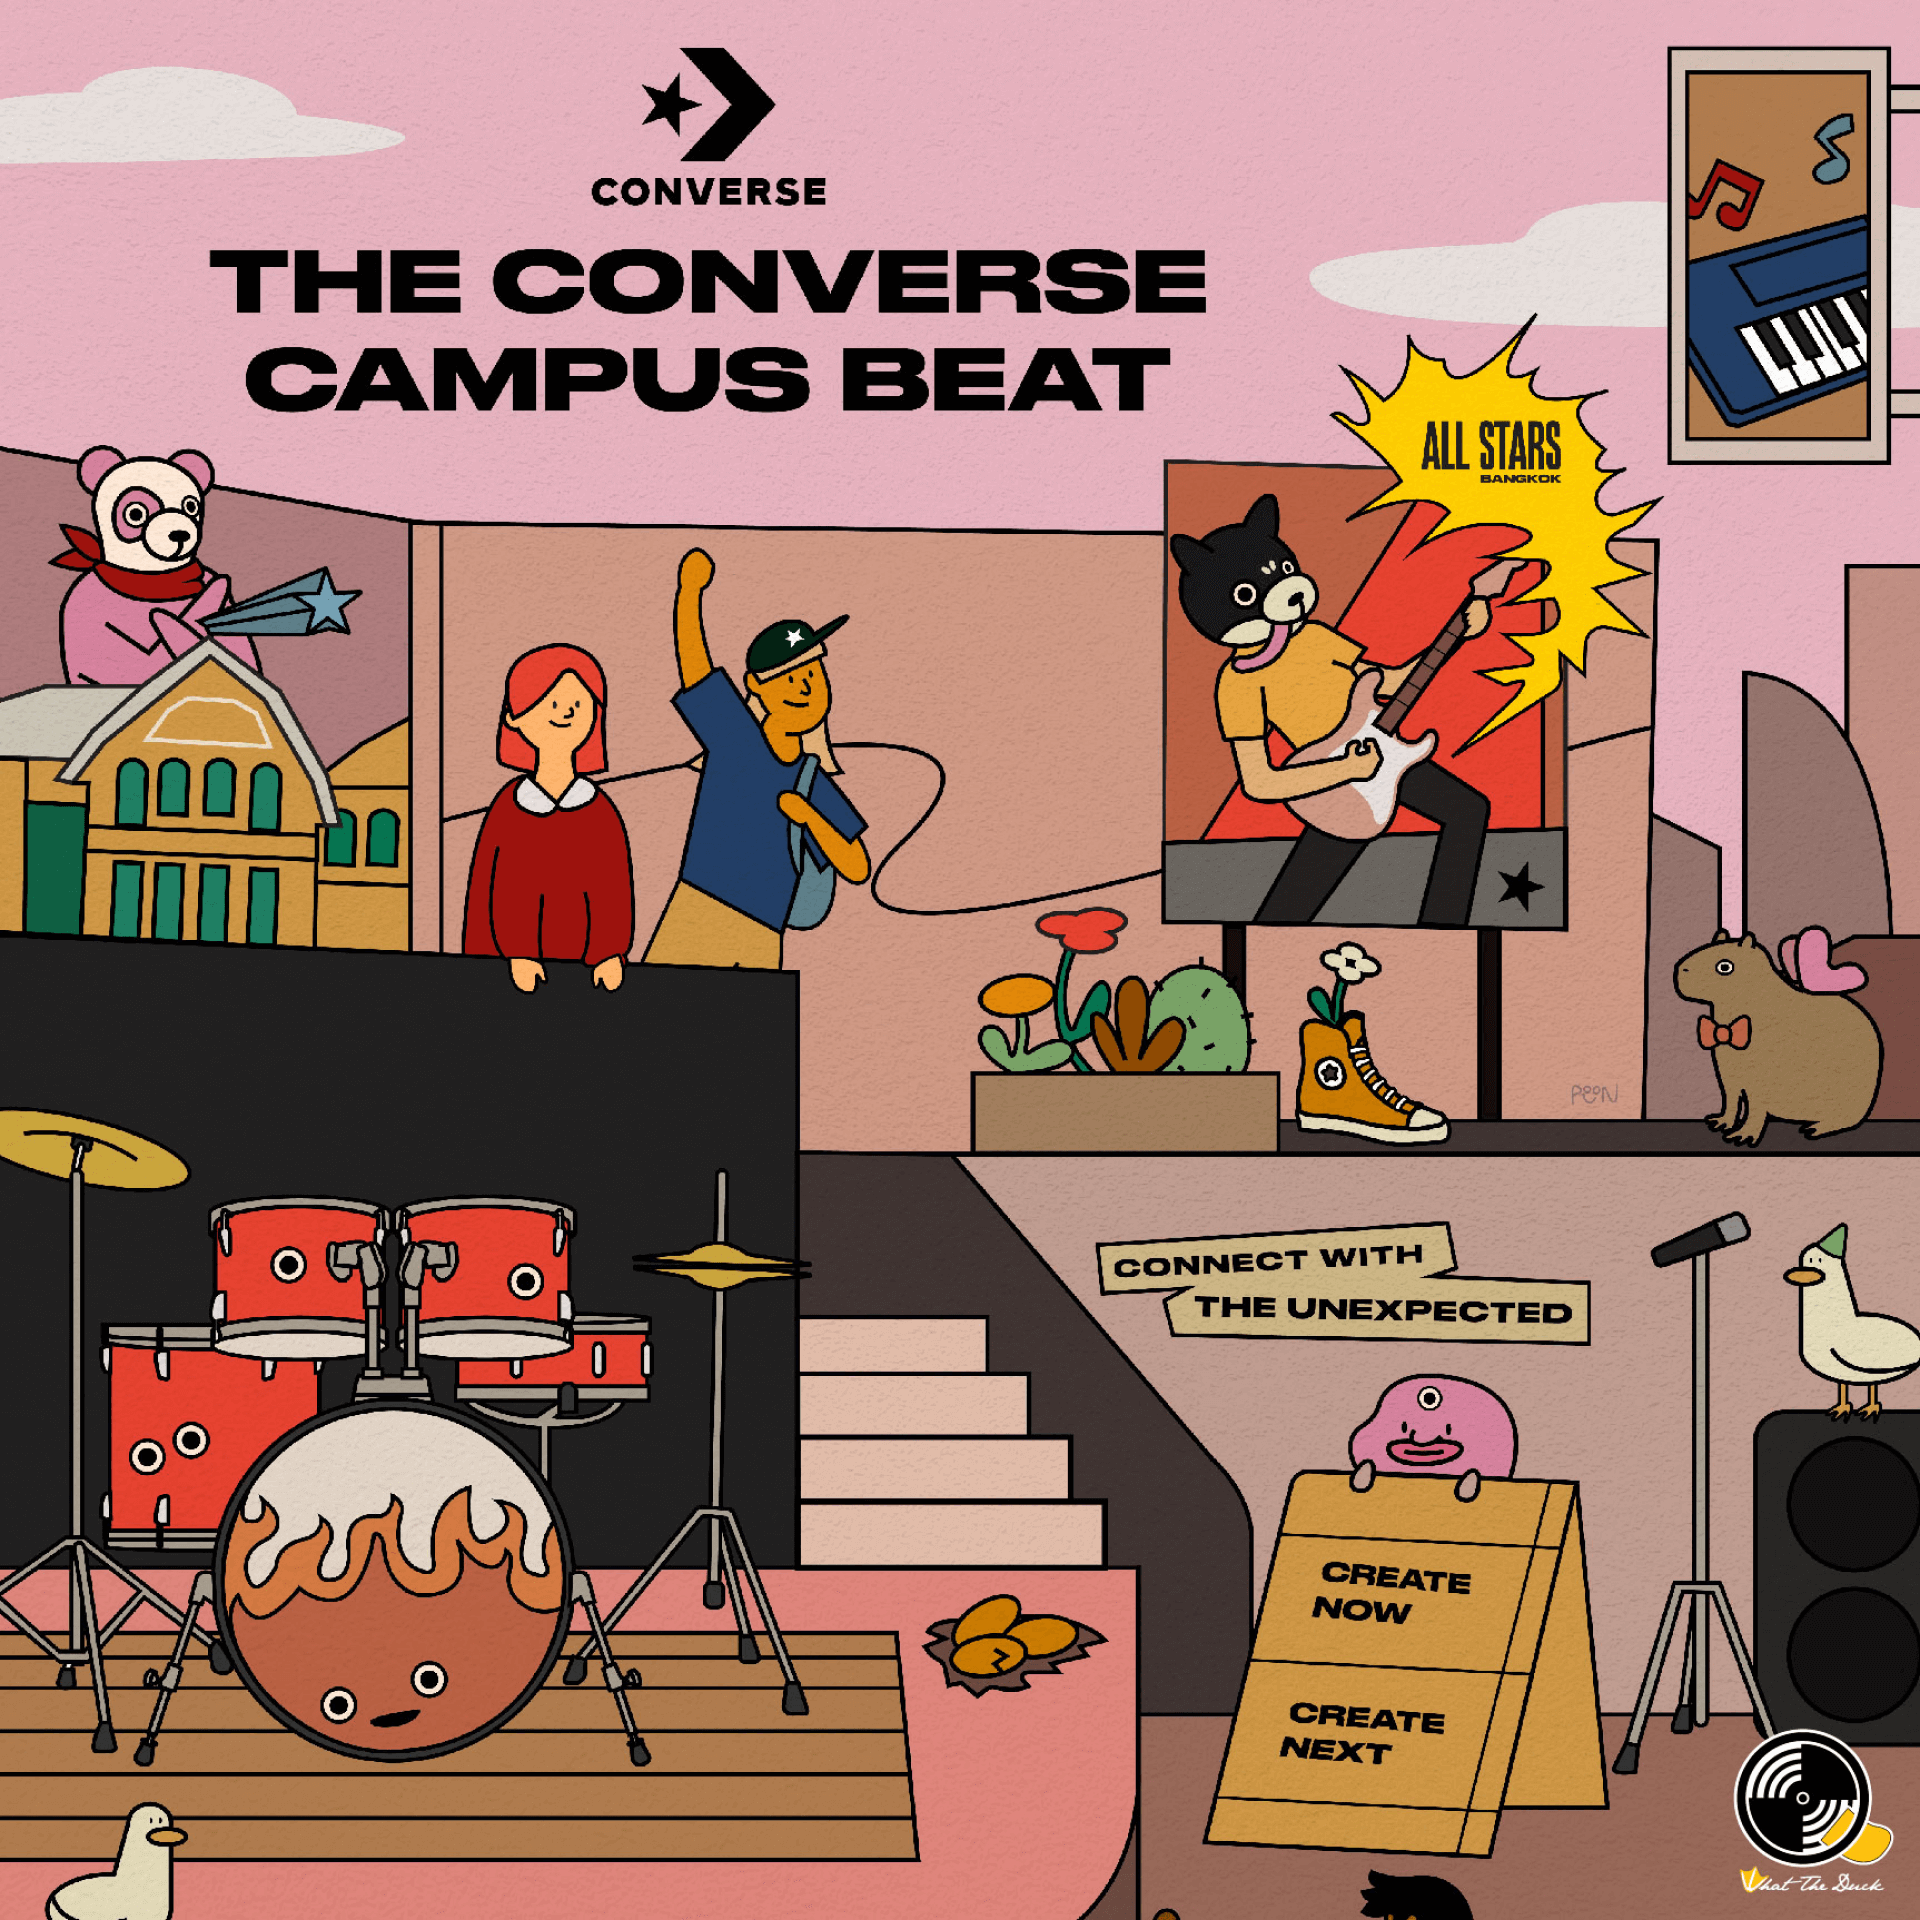 THE CONVERSE CAMPUS BEAT: THE UNEXPECTED SOUNDS OF SIAM